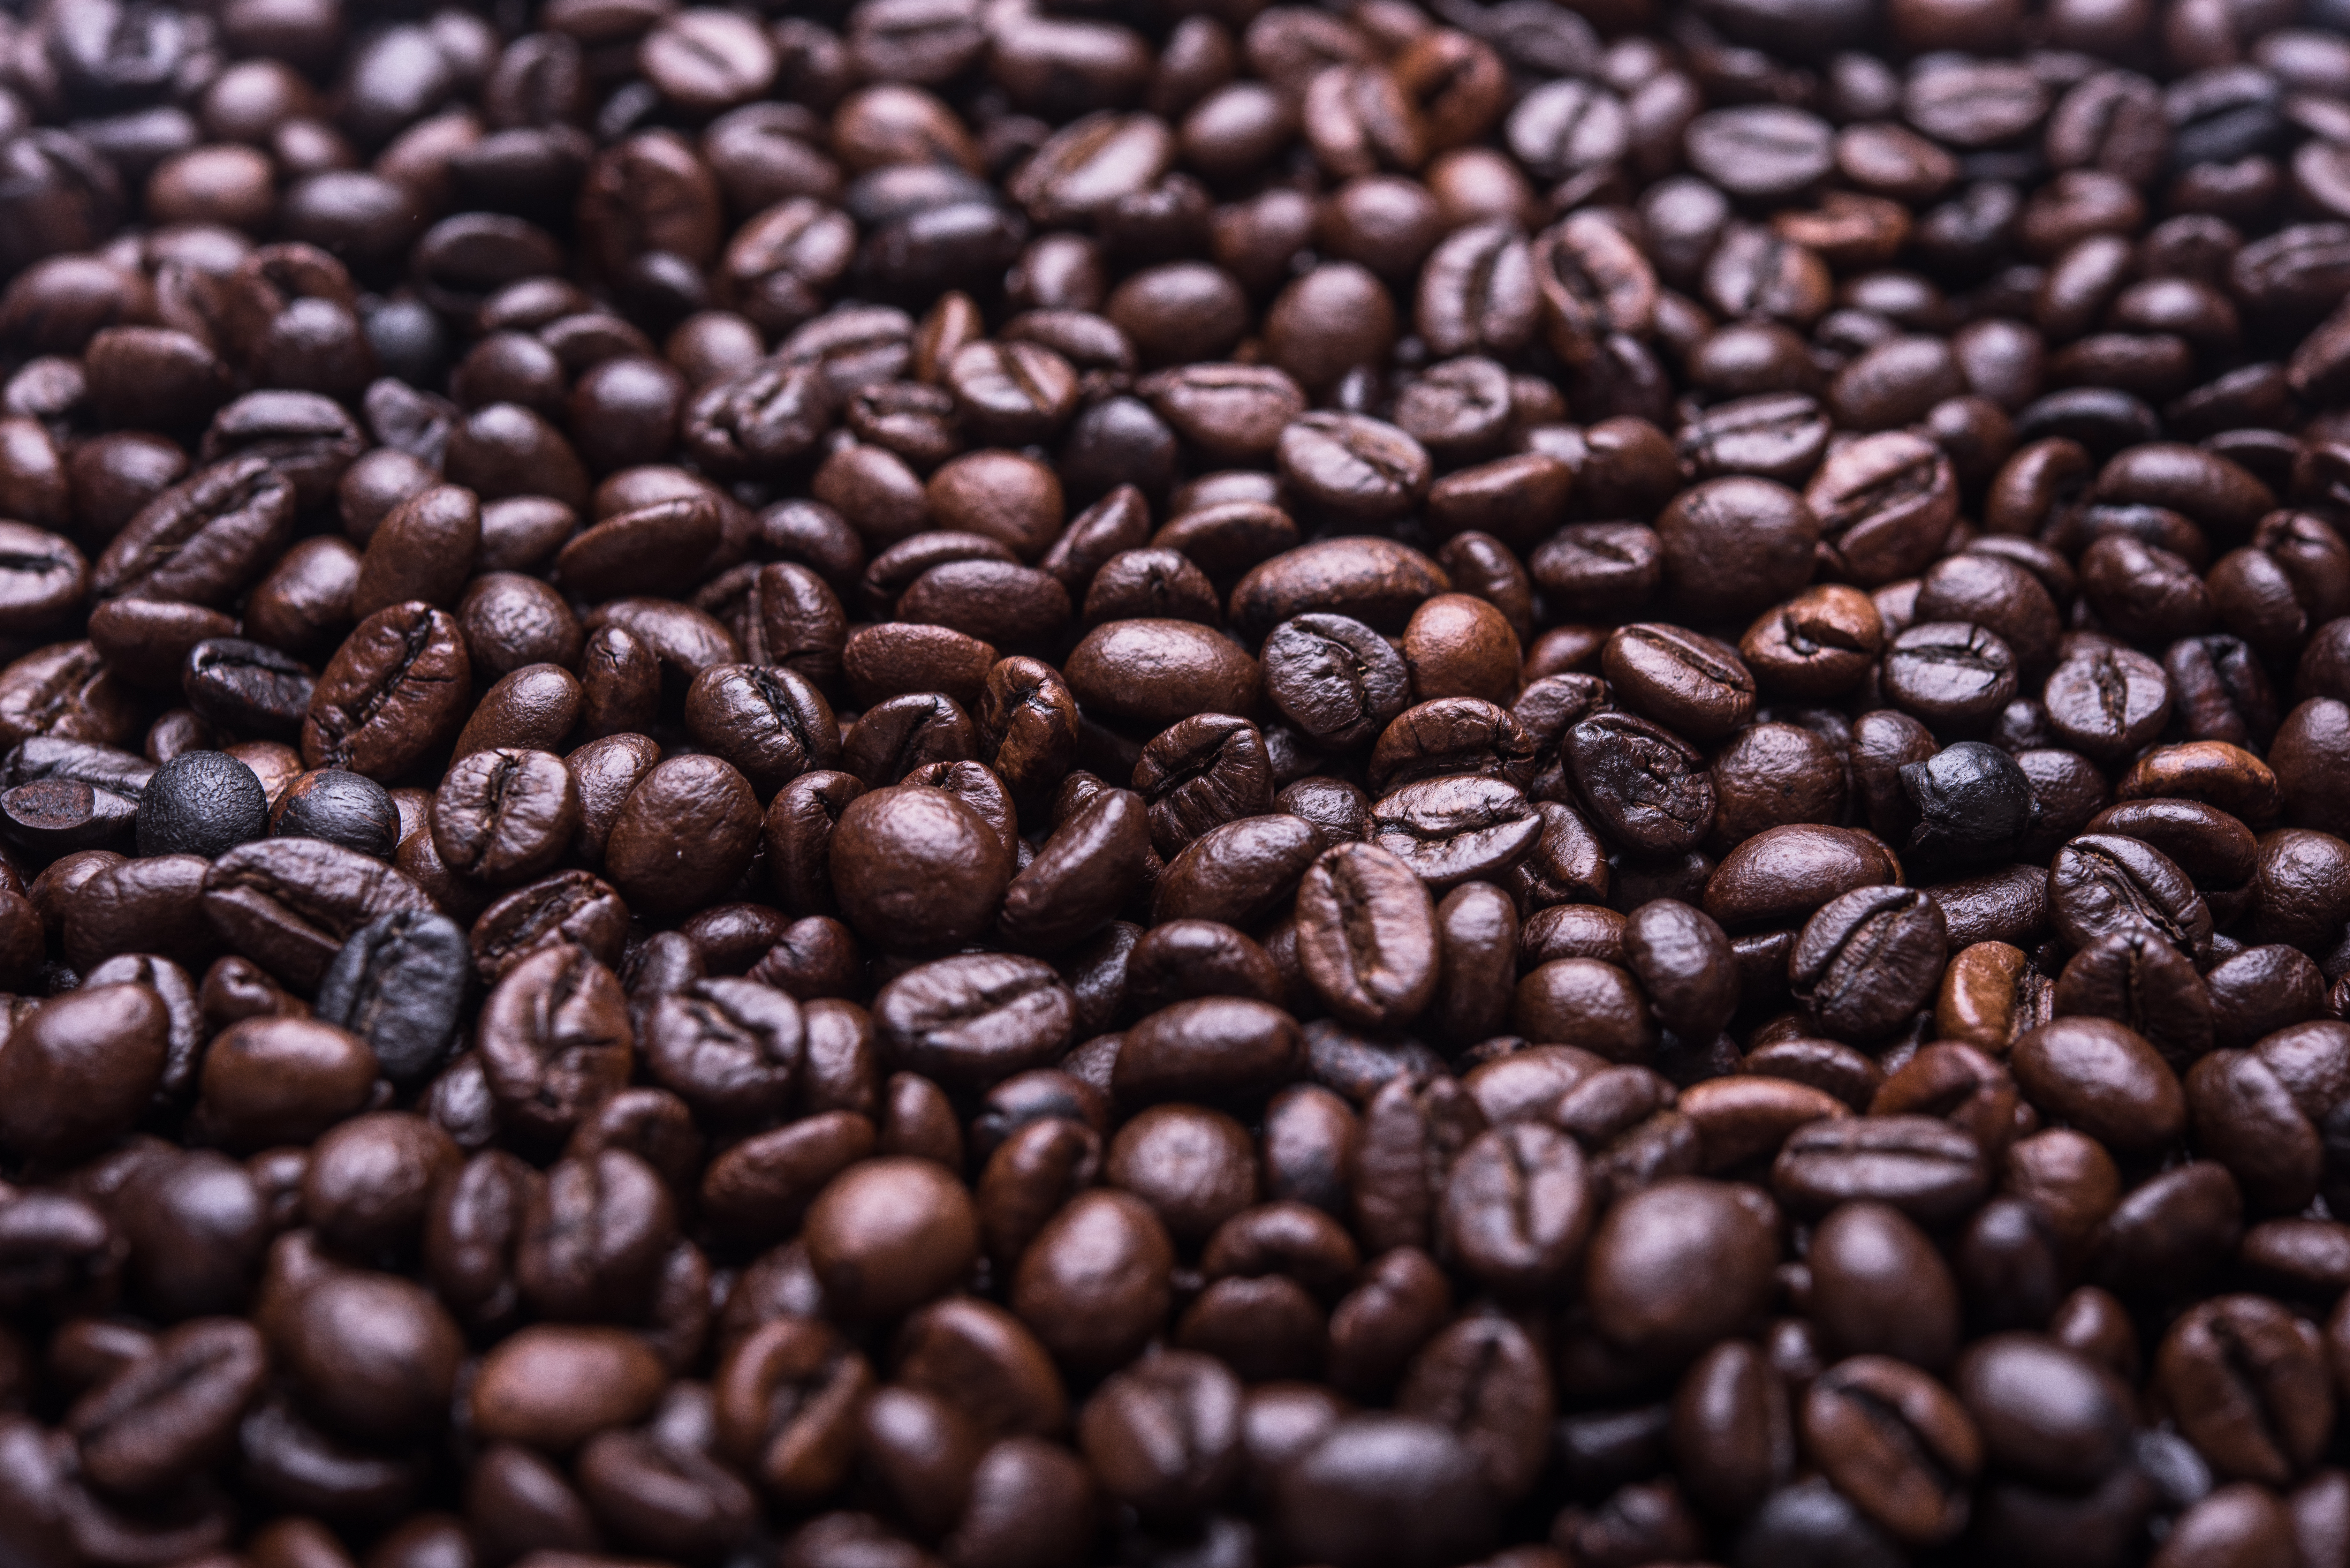 File:A lot of coffee beans.jpg - Wikimedia Commons